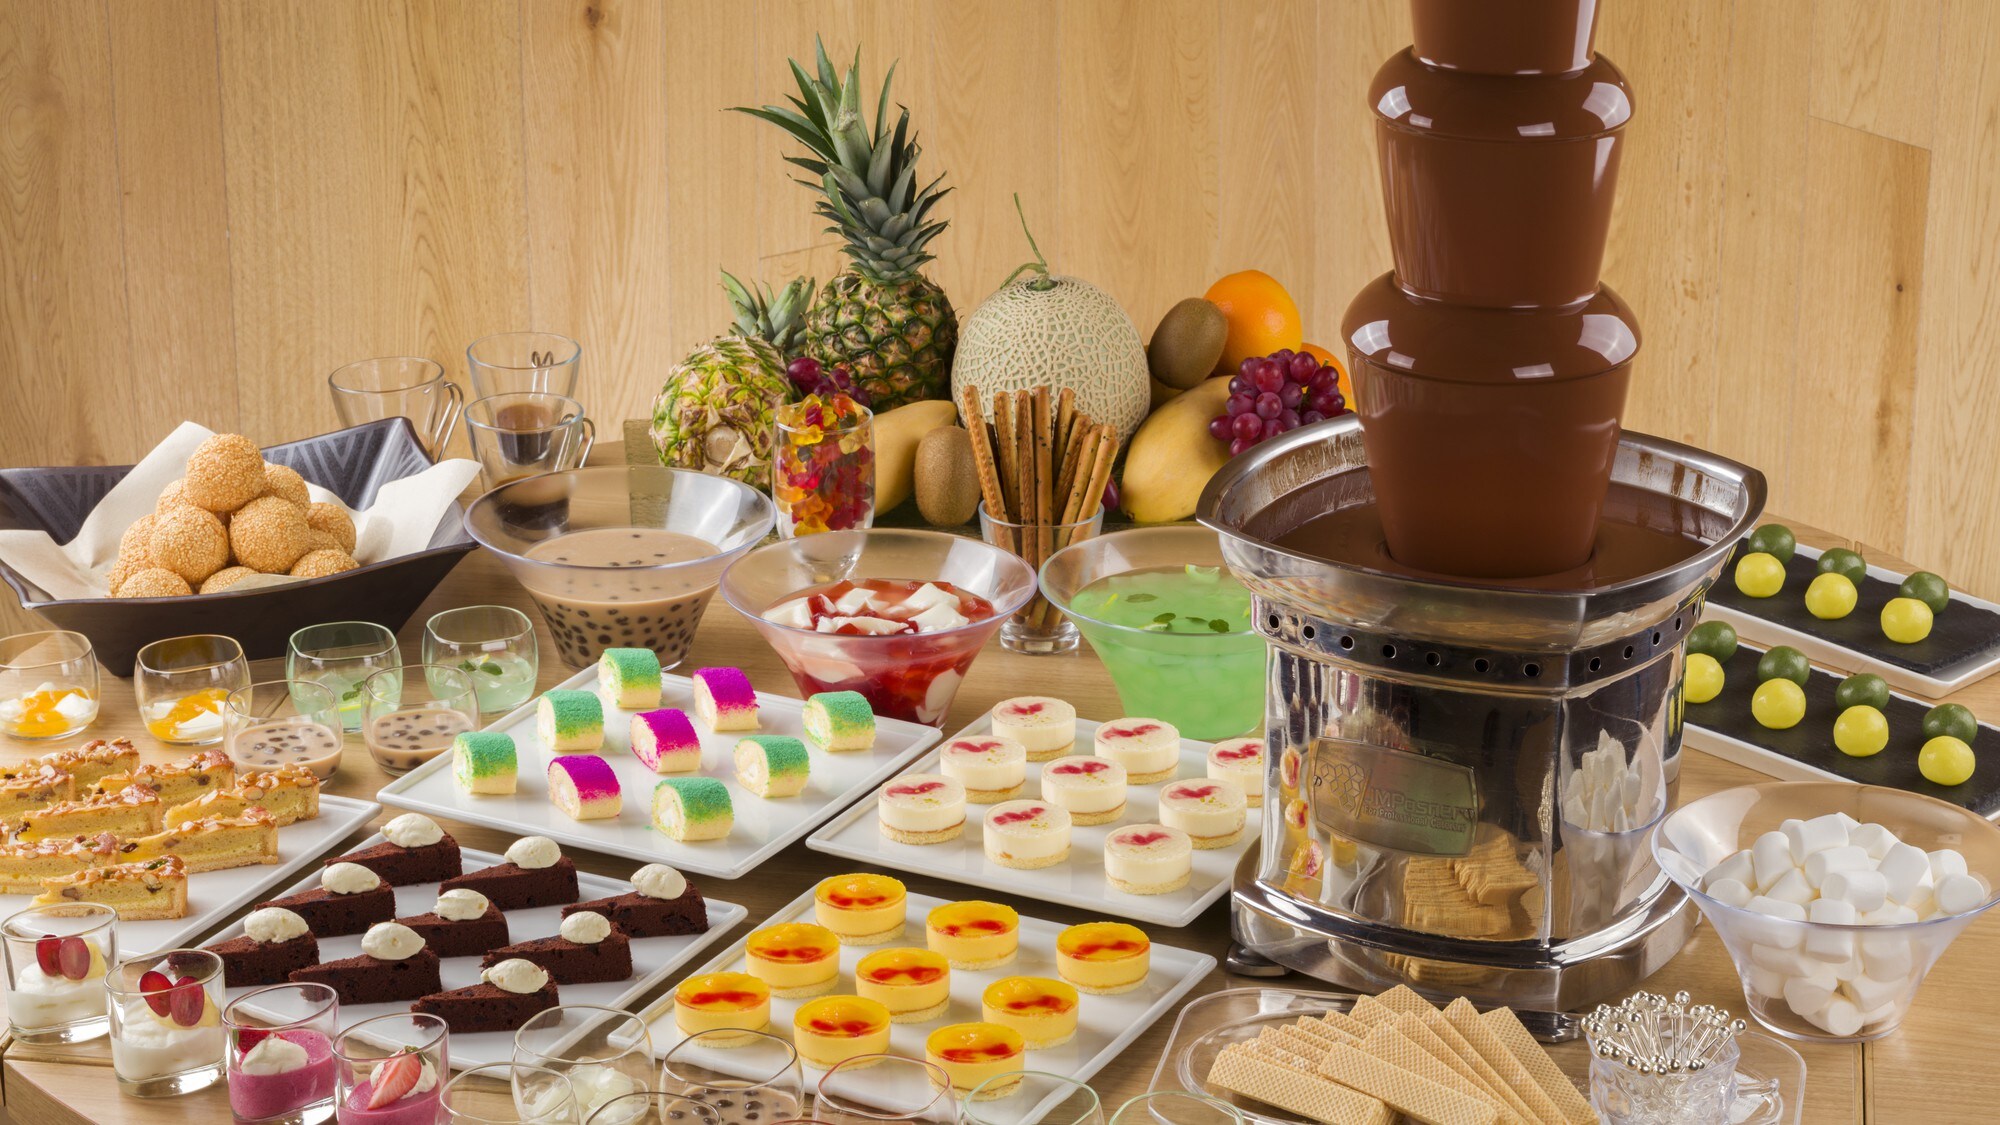 Also the popular chocolate fountain! A wide variety of desserts